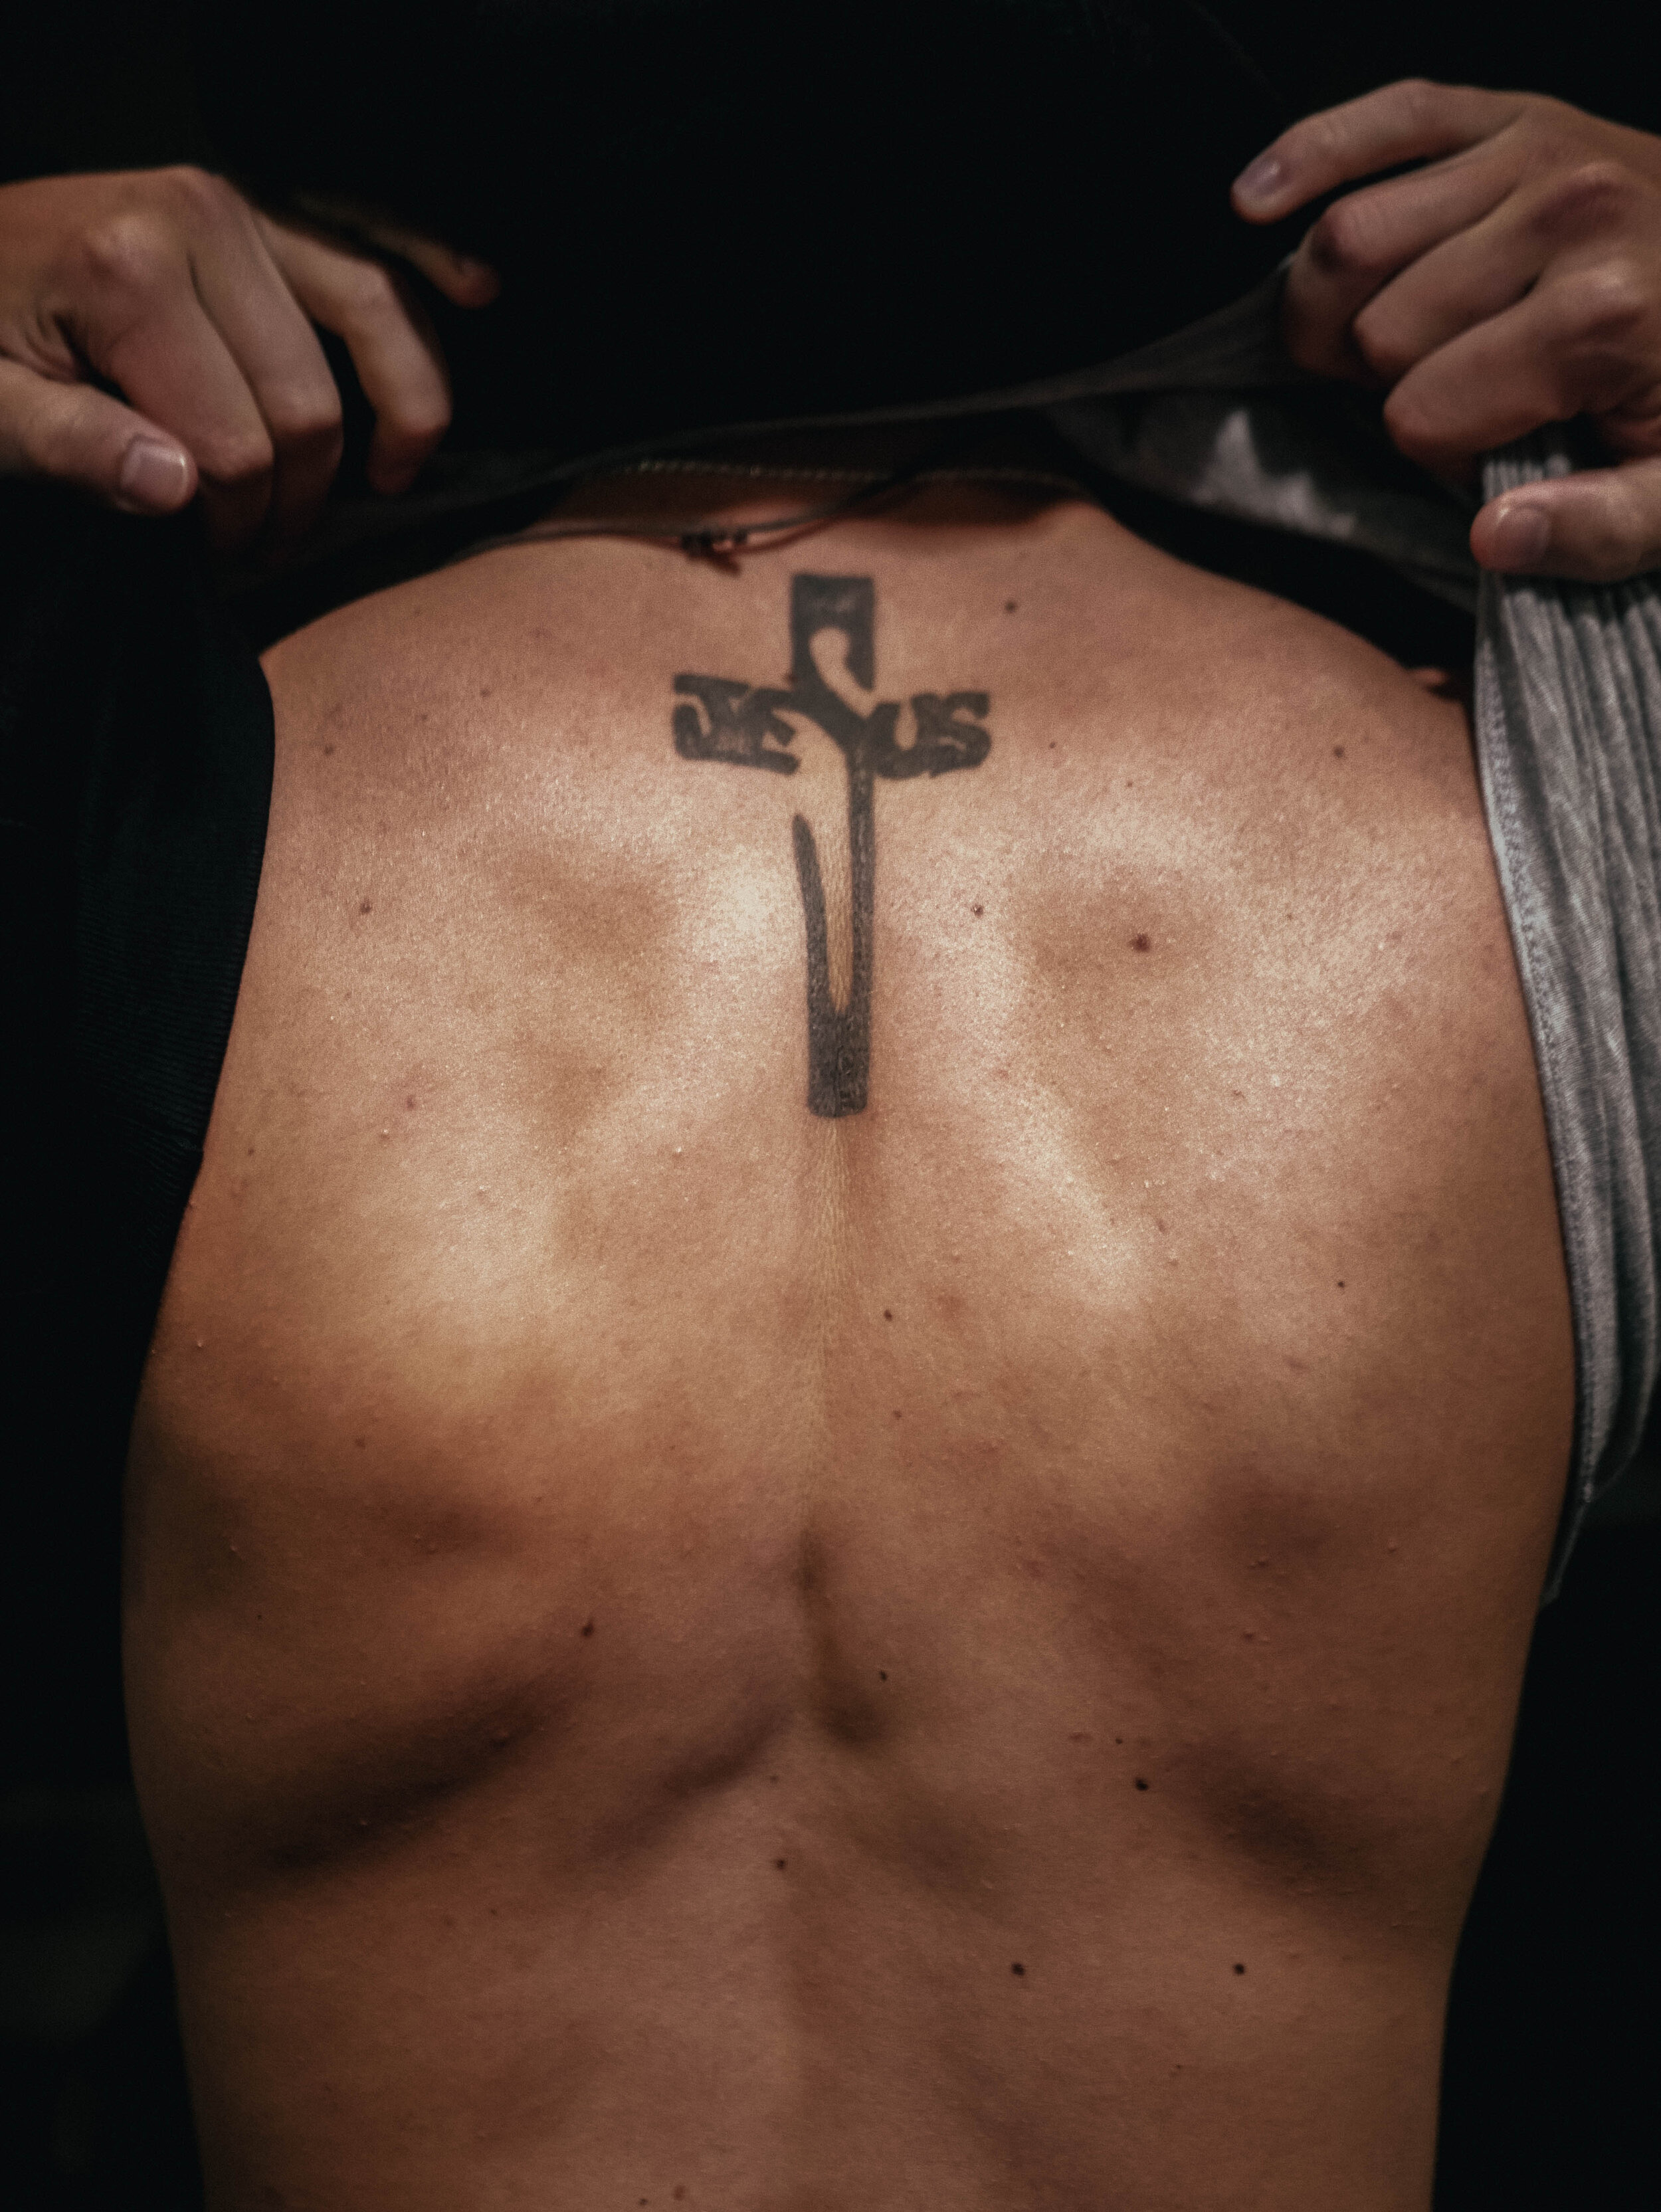 Tattoos reflecting the faith of their owner are the most beautiful to me. Luis Molina (Senior)